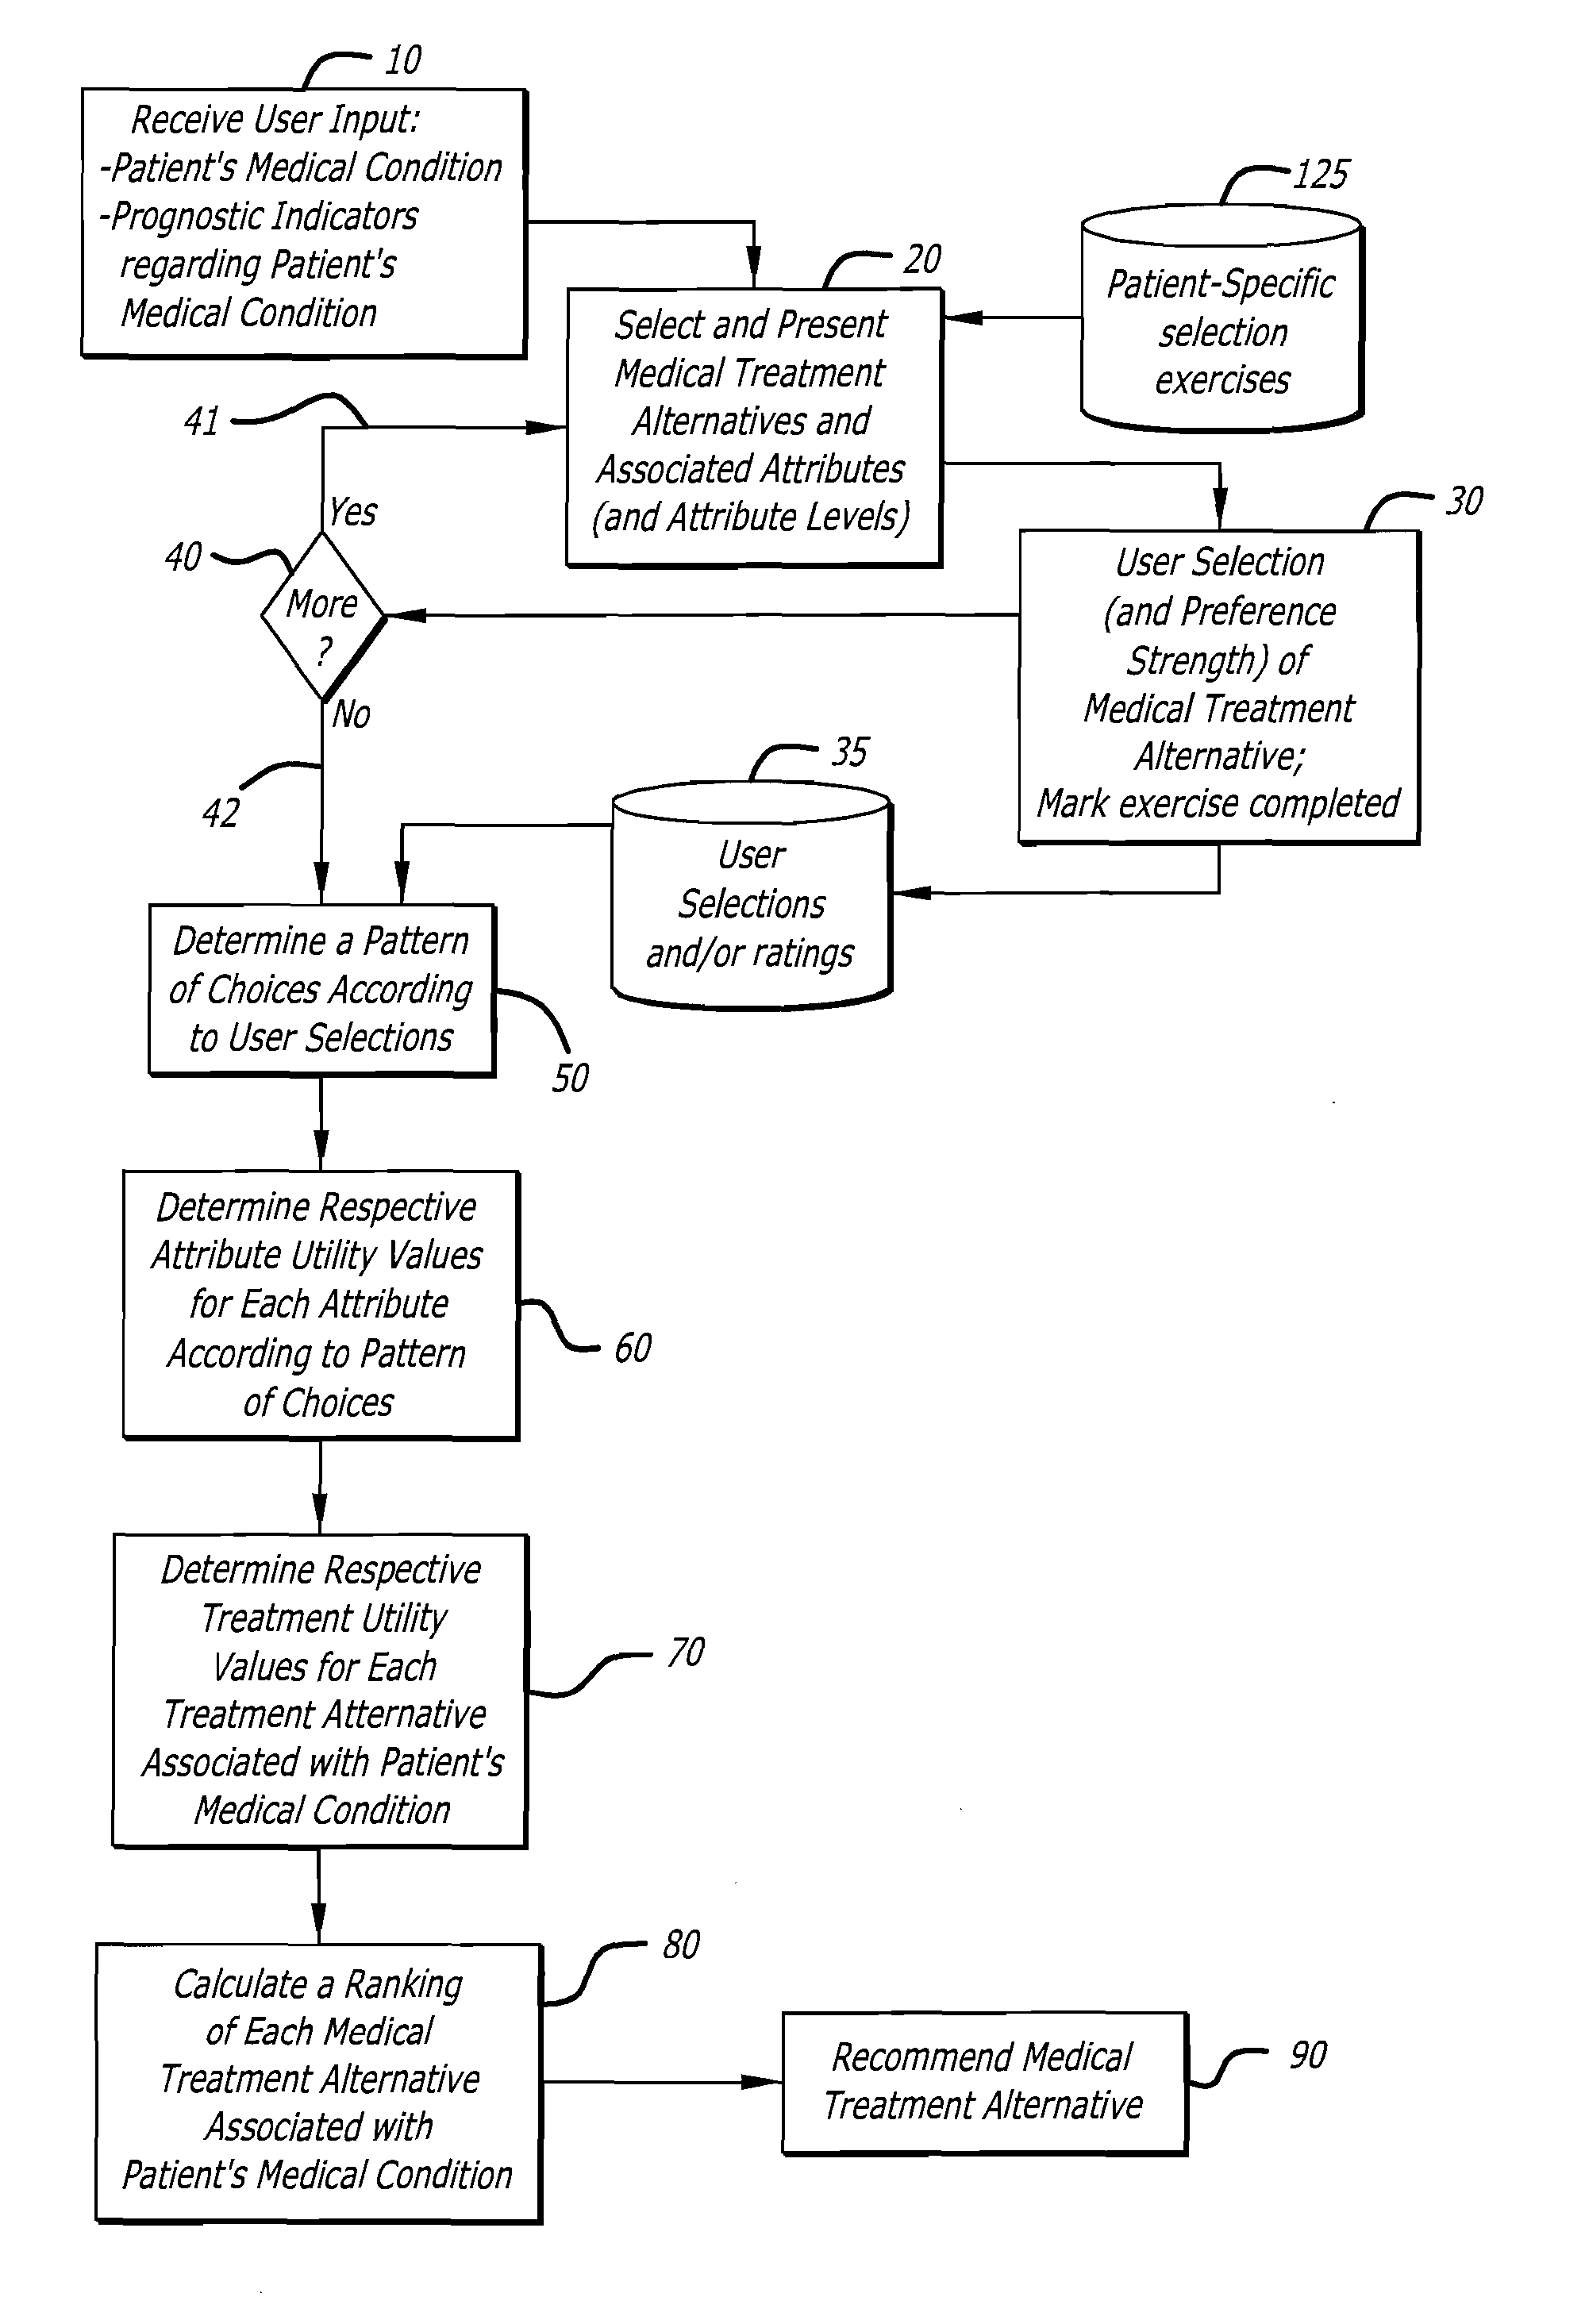 Medical care treatment decision support system